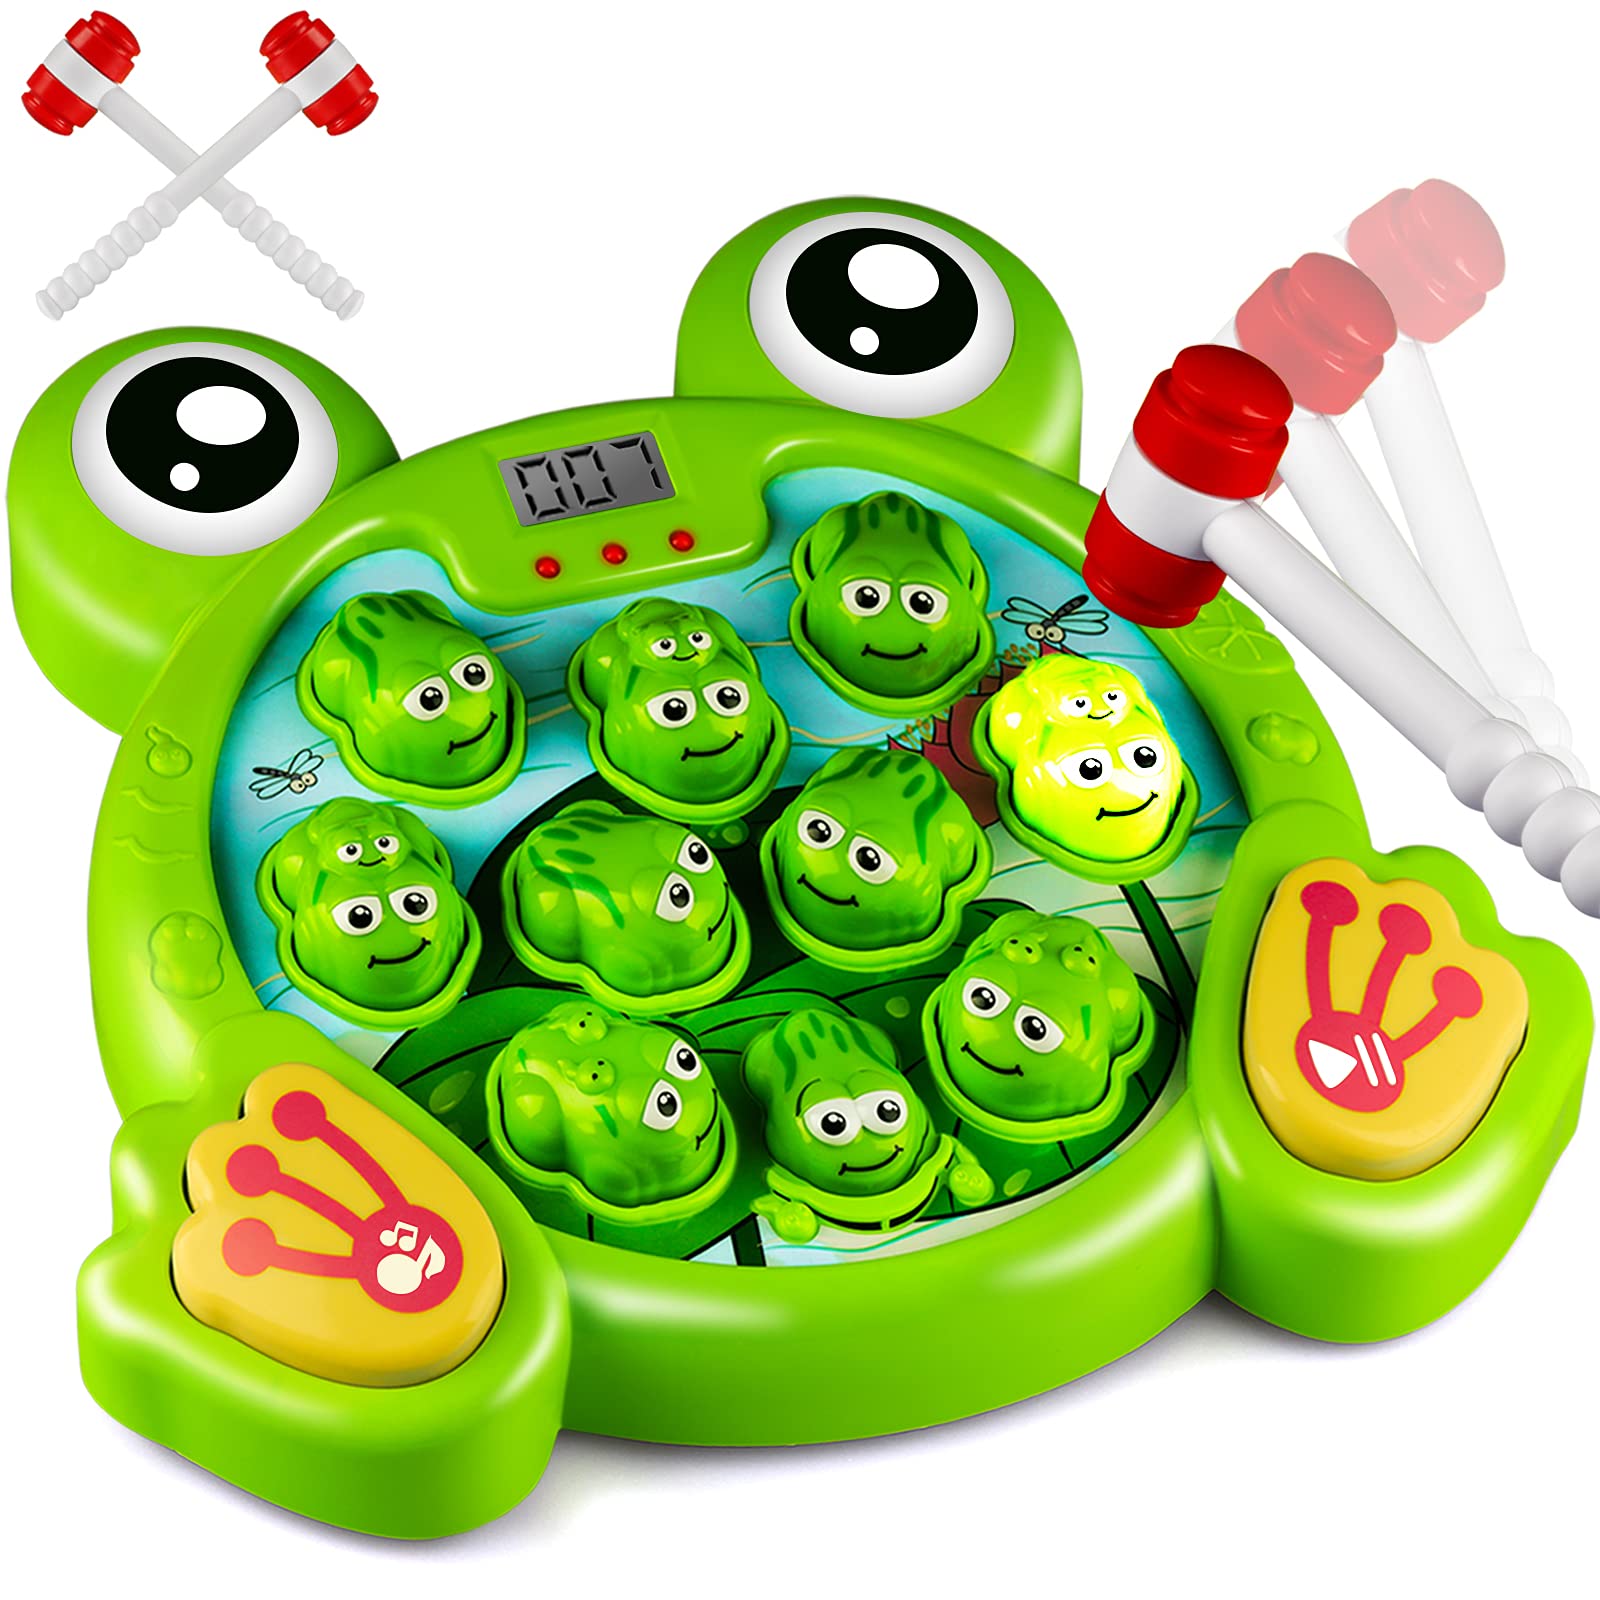 KKONES Music Super Frog Game Toddler Toys - 2 Hammers Baby Interactive Fun Toys Toddler Activities Games with Music and Light Gift for Kids Ages 2 3 4 5 6 7 8 Year Old Boys Girls